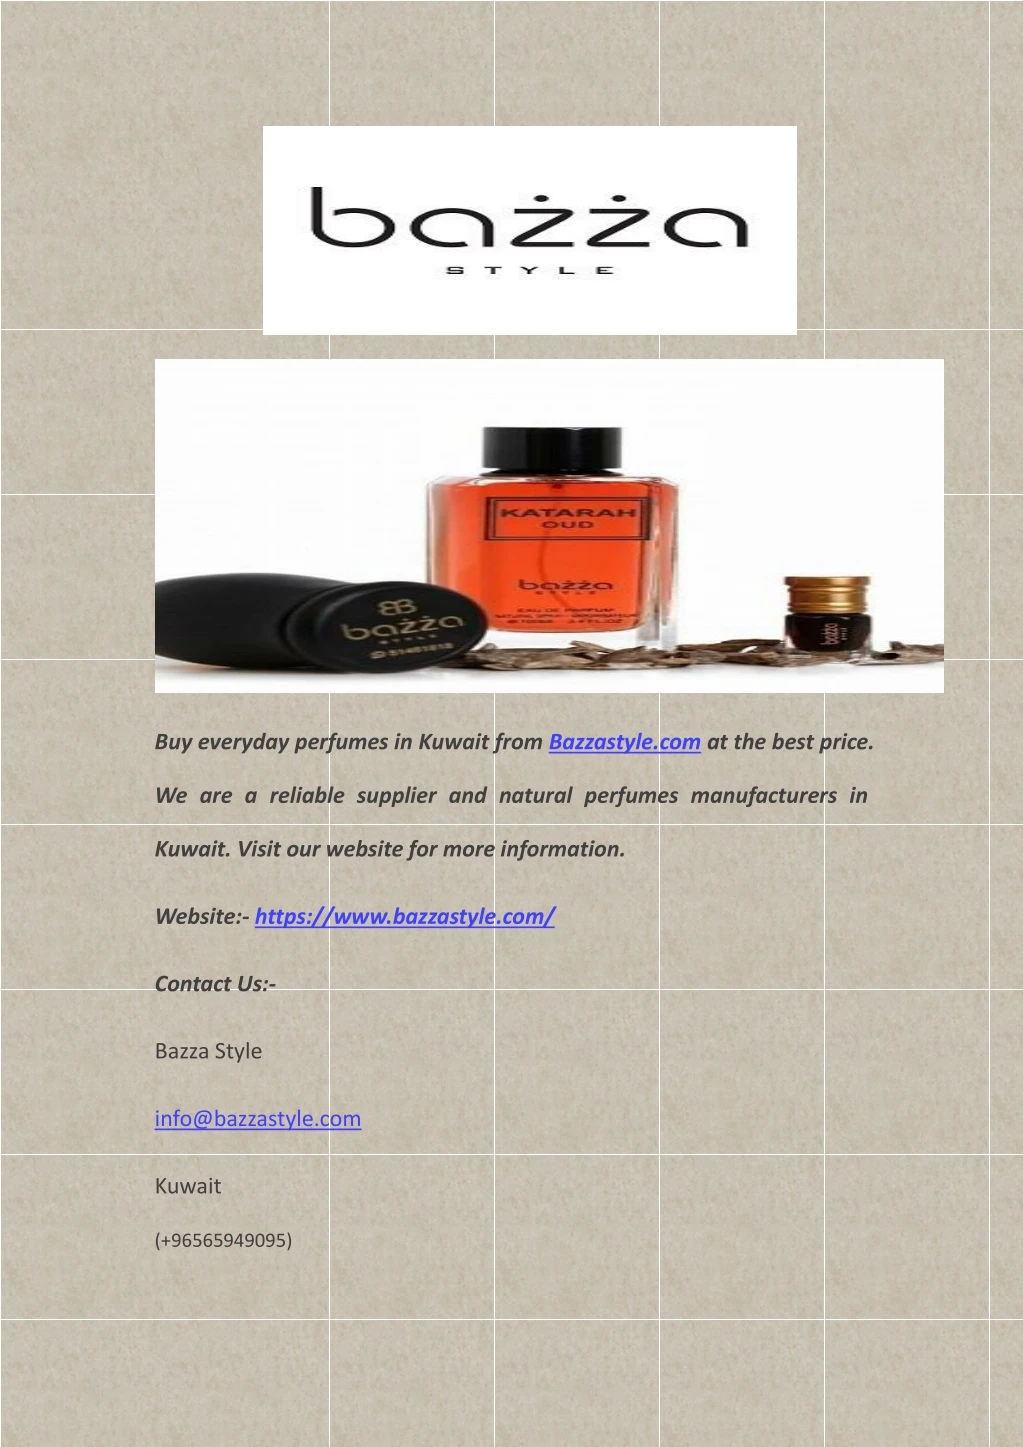 buy everyday perfumes in kuwait from bazzastyle